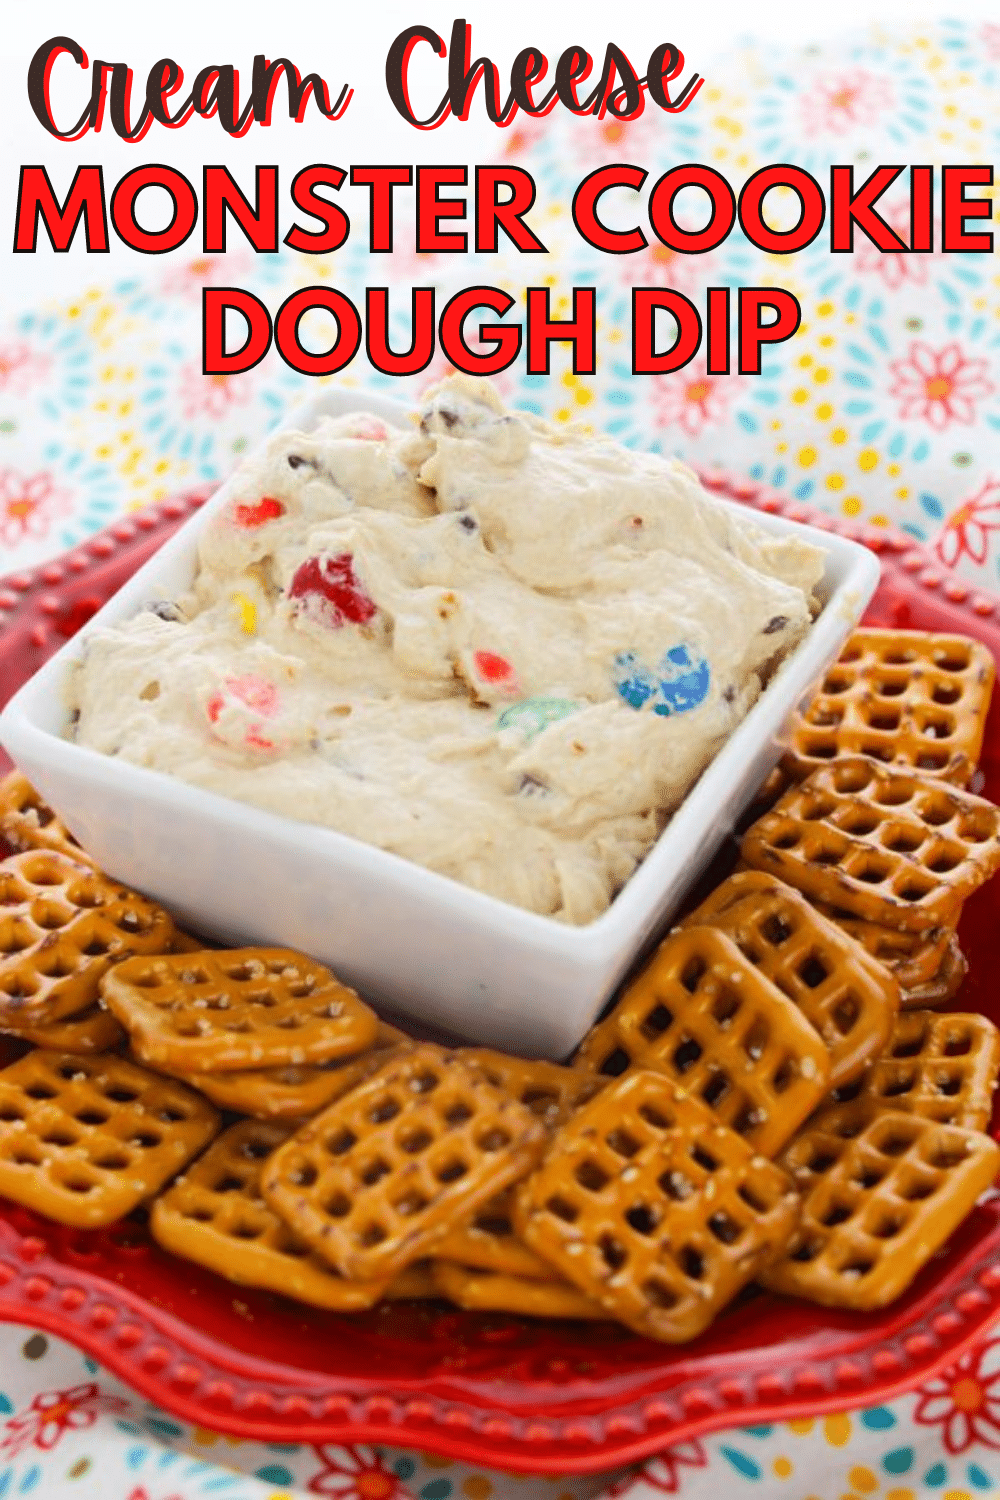 Indulge in the rich and creamy delight of our cream cheese monster cookie dough dip.